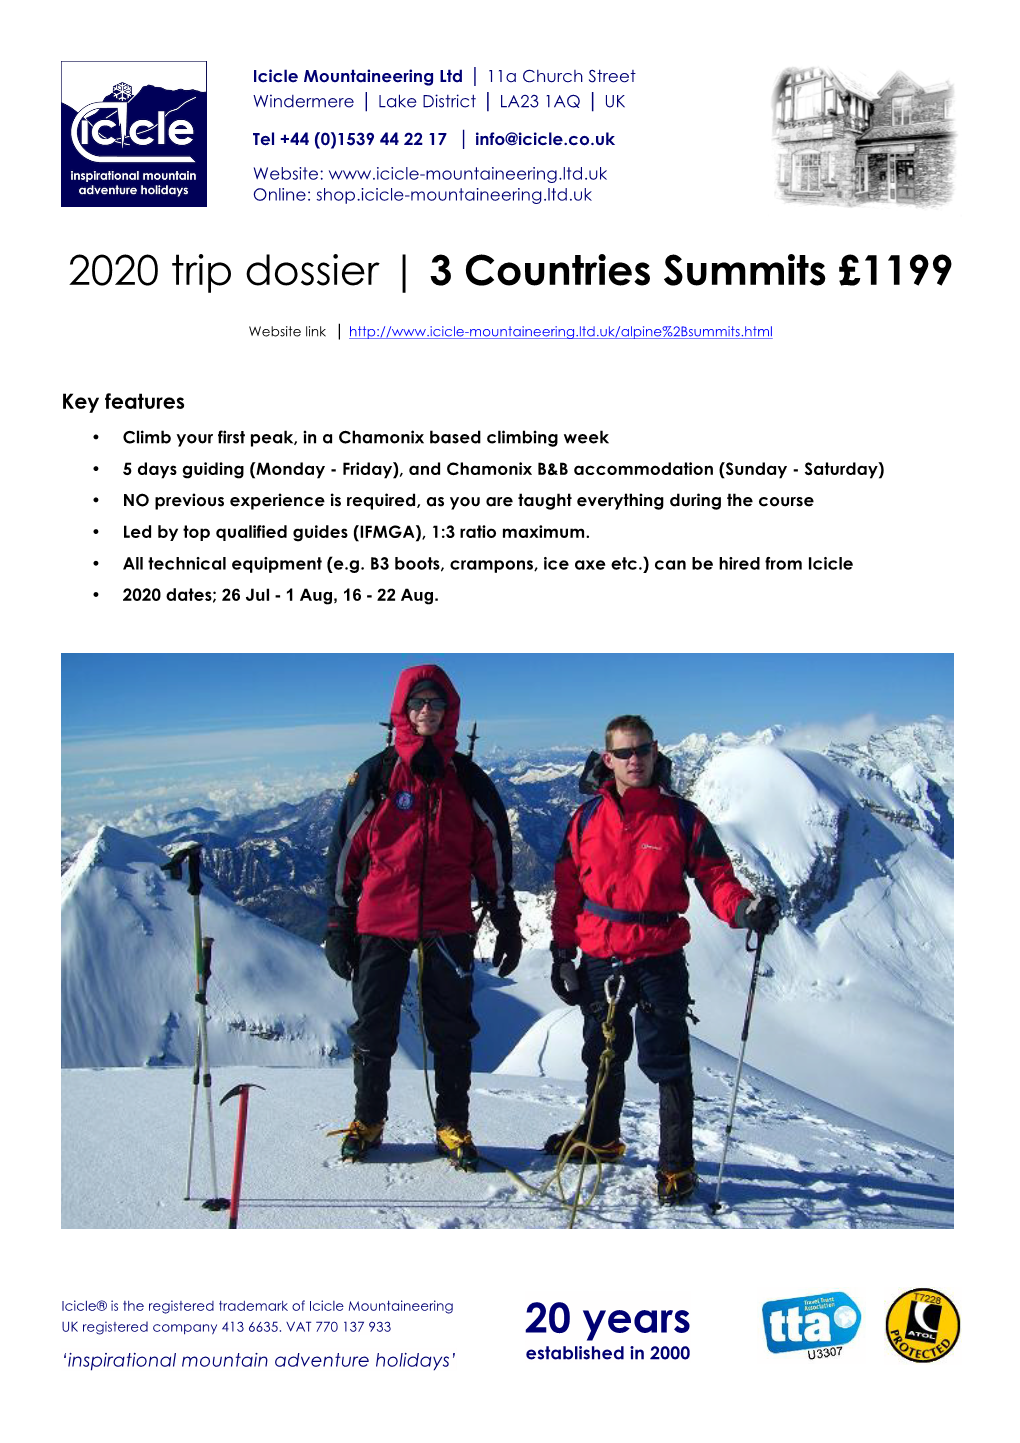 20 Years 2020 Trip Dossier | 3 Countries Summits £1199